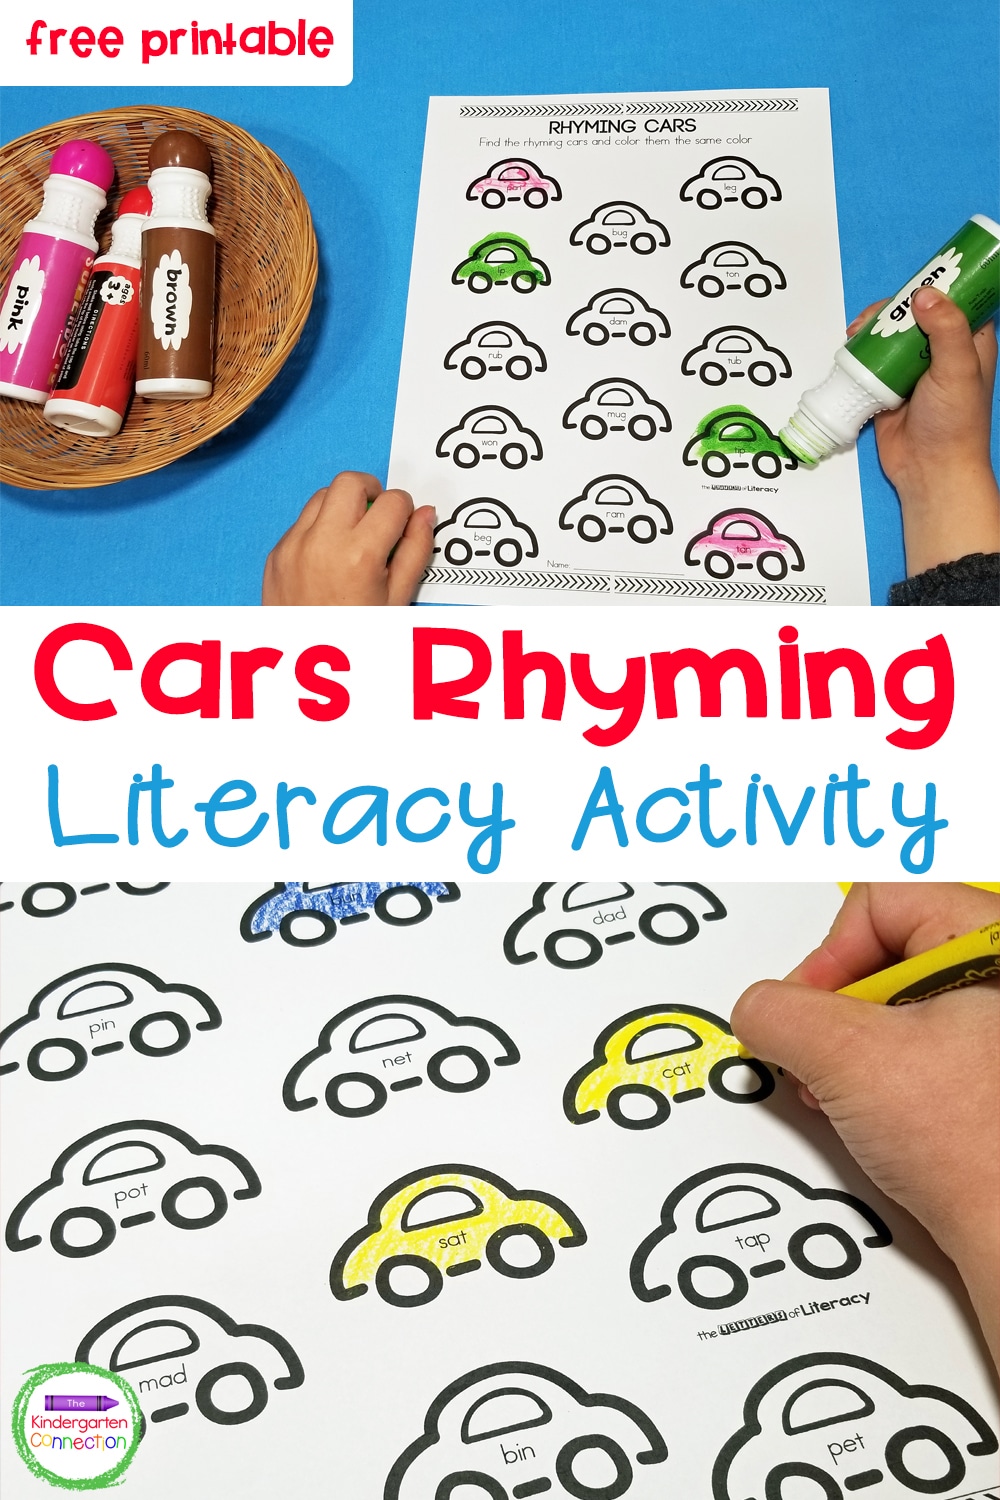 Grab this free printable Cars Rhyming Activity for your Kindergarten literacy centers! Students simply color in the rhyming cars pairs!